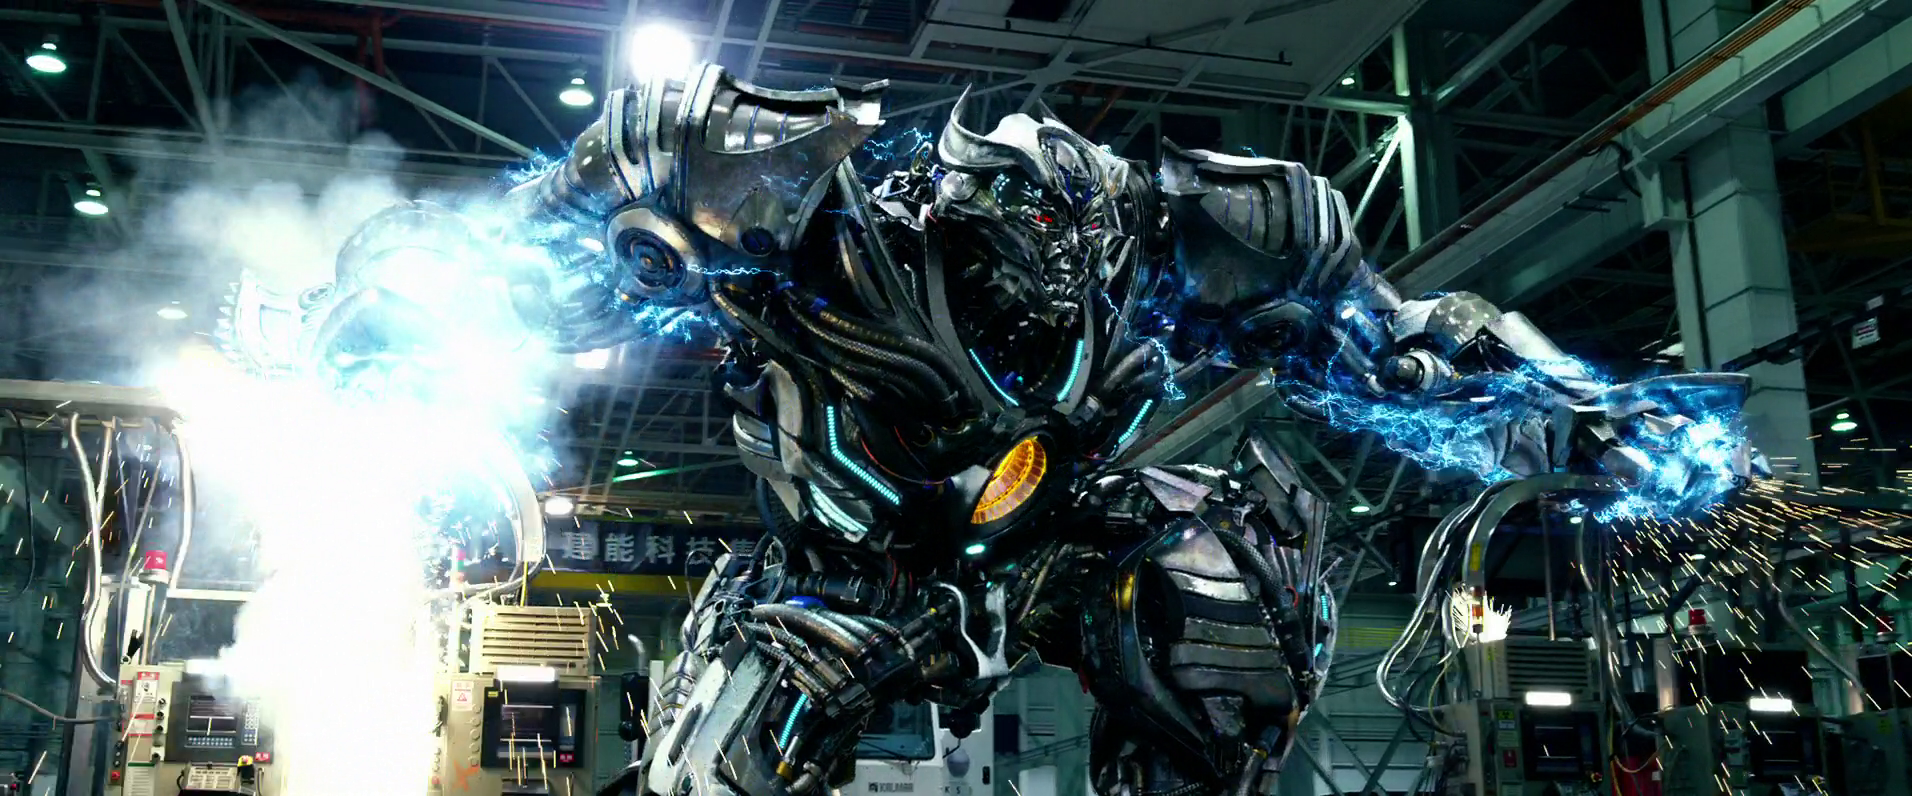 transformers 4 galvatron is online betting